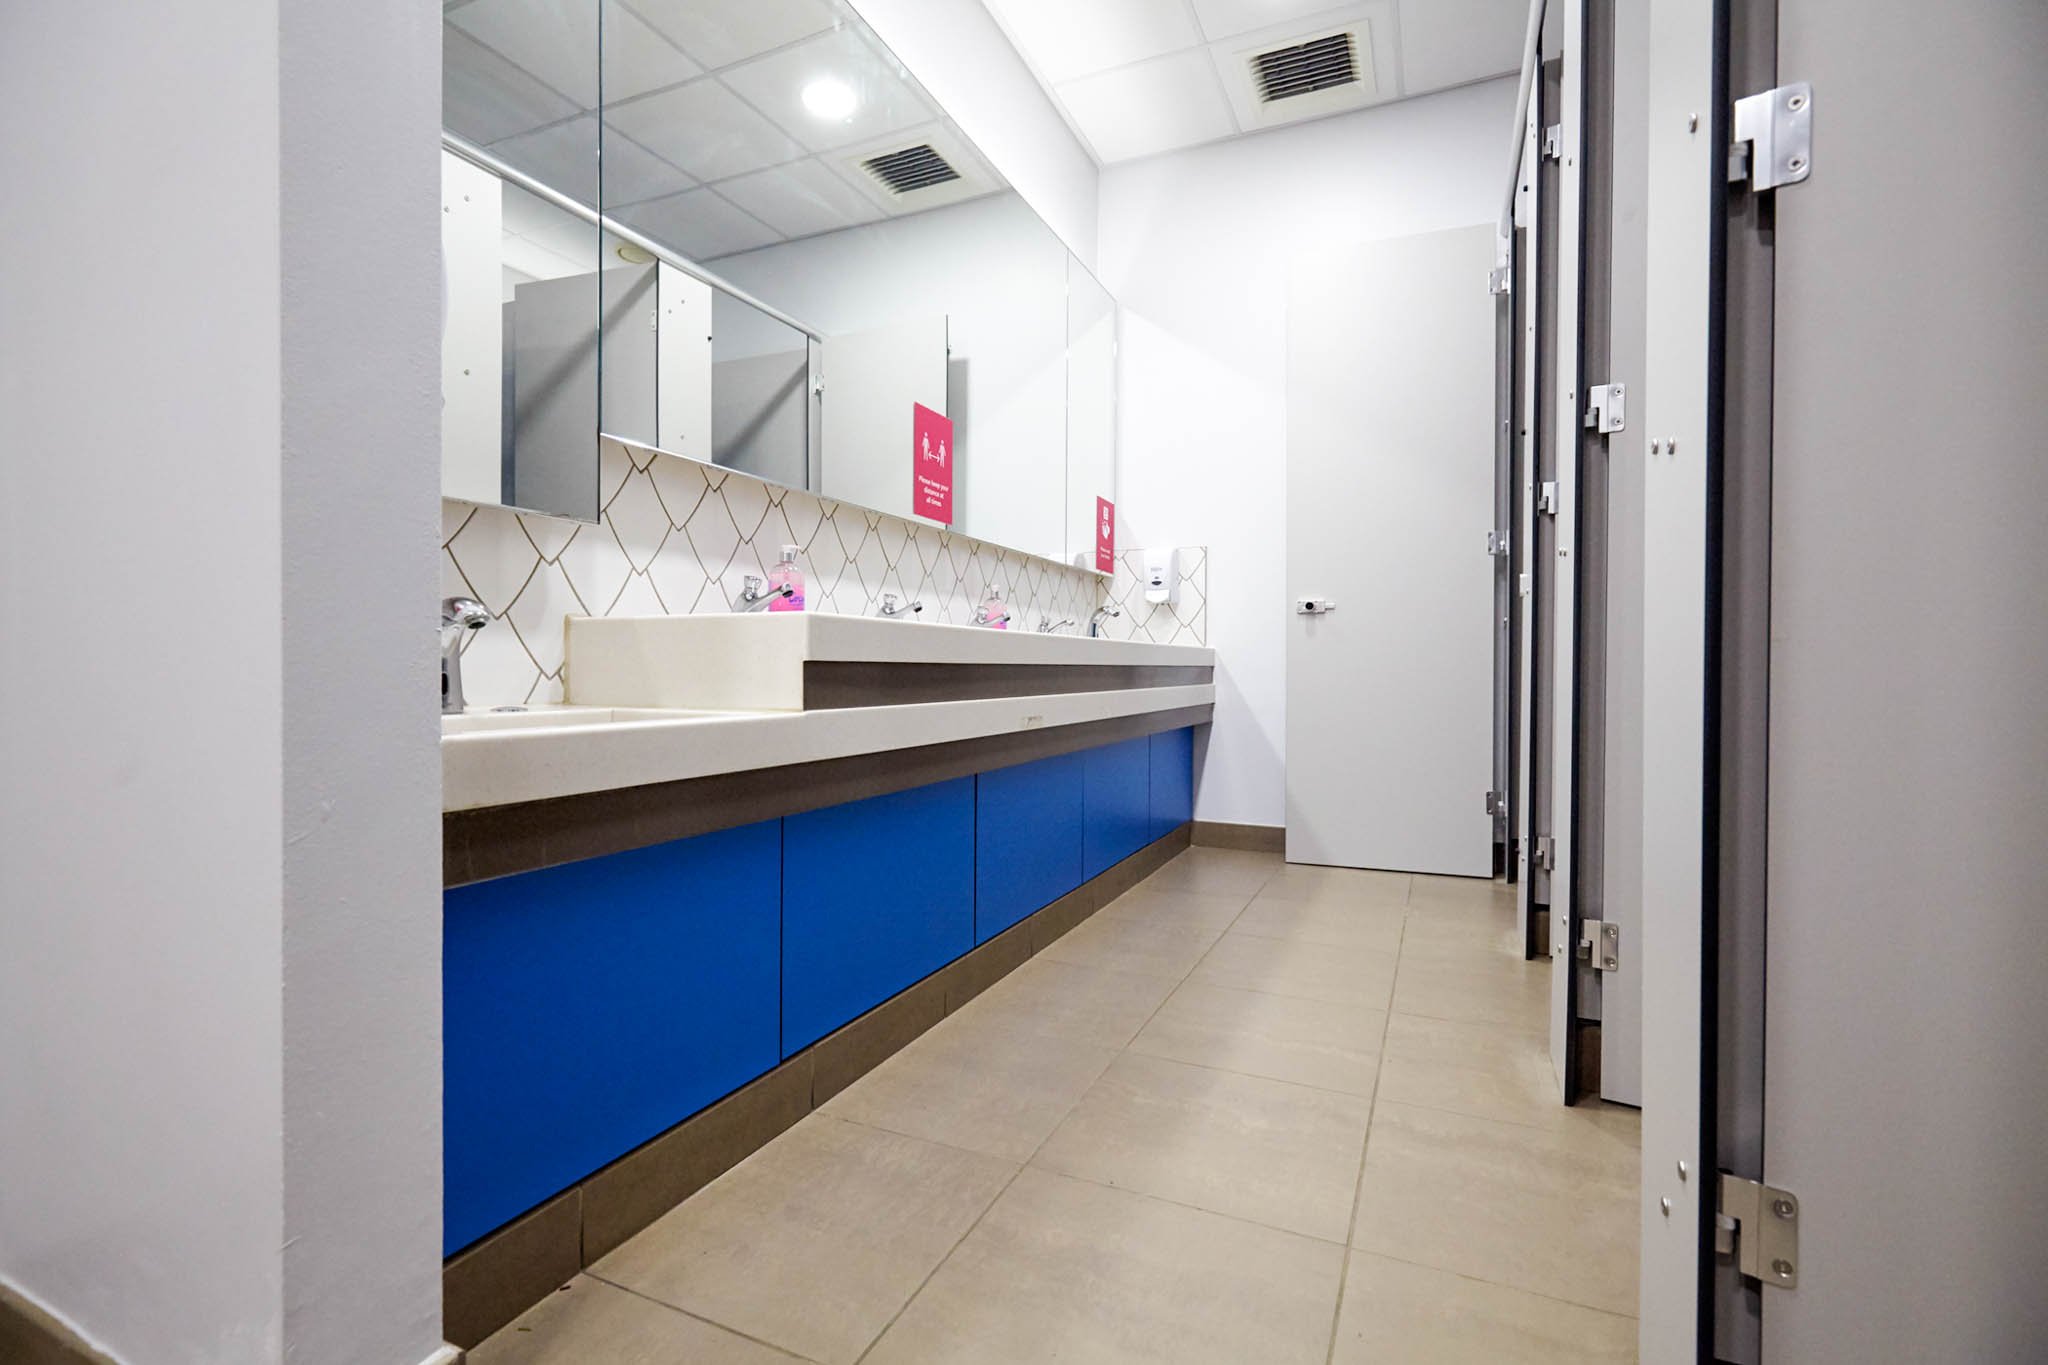 washroom with grey cubicles and blue vanity hand wash area with hand wash trough and mirrors above at national maritime museum.jpg